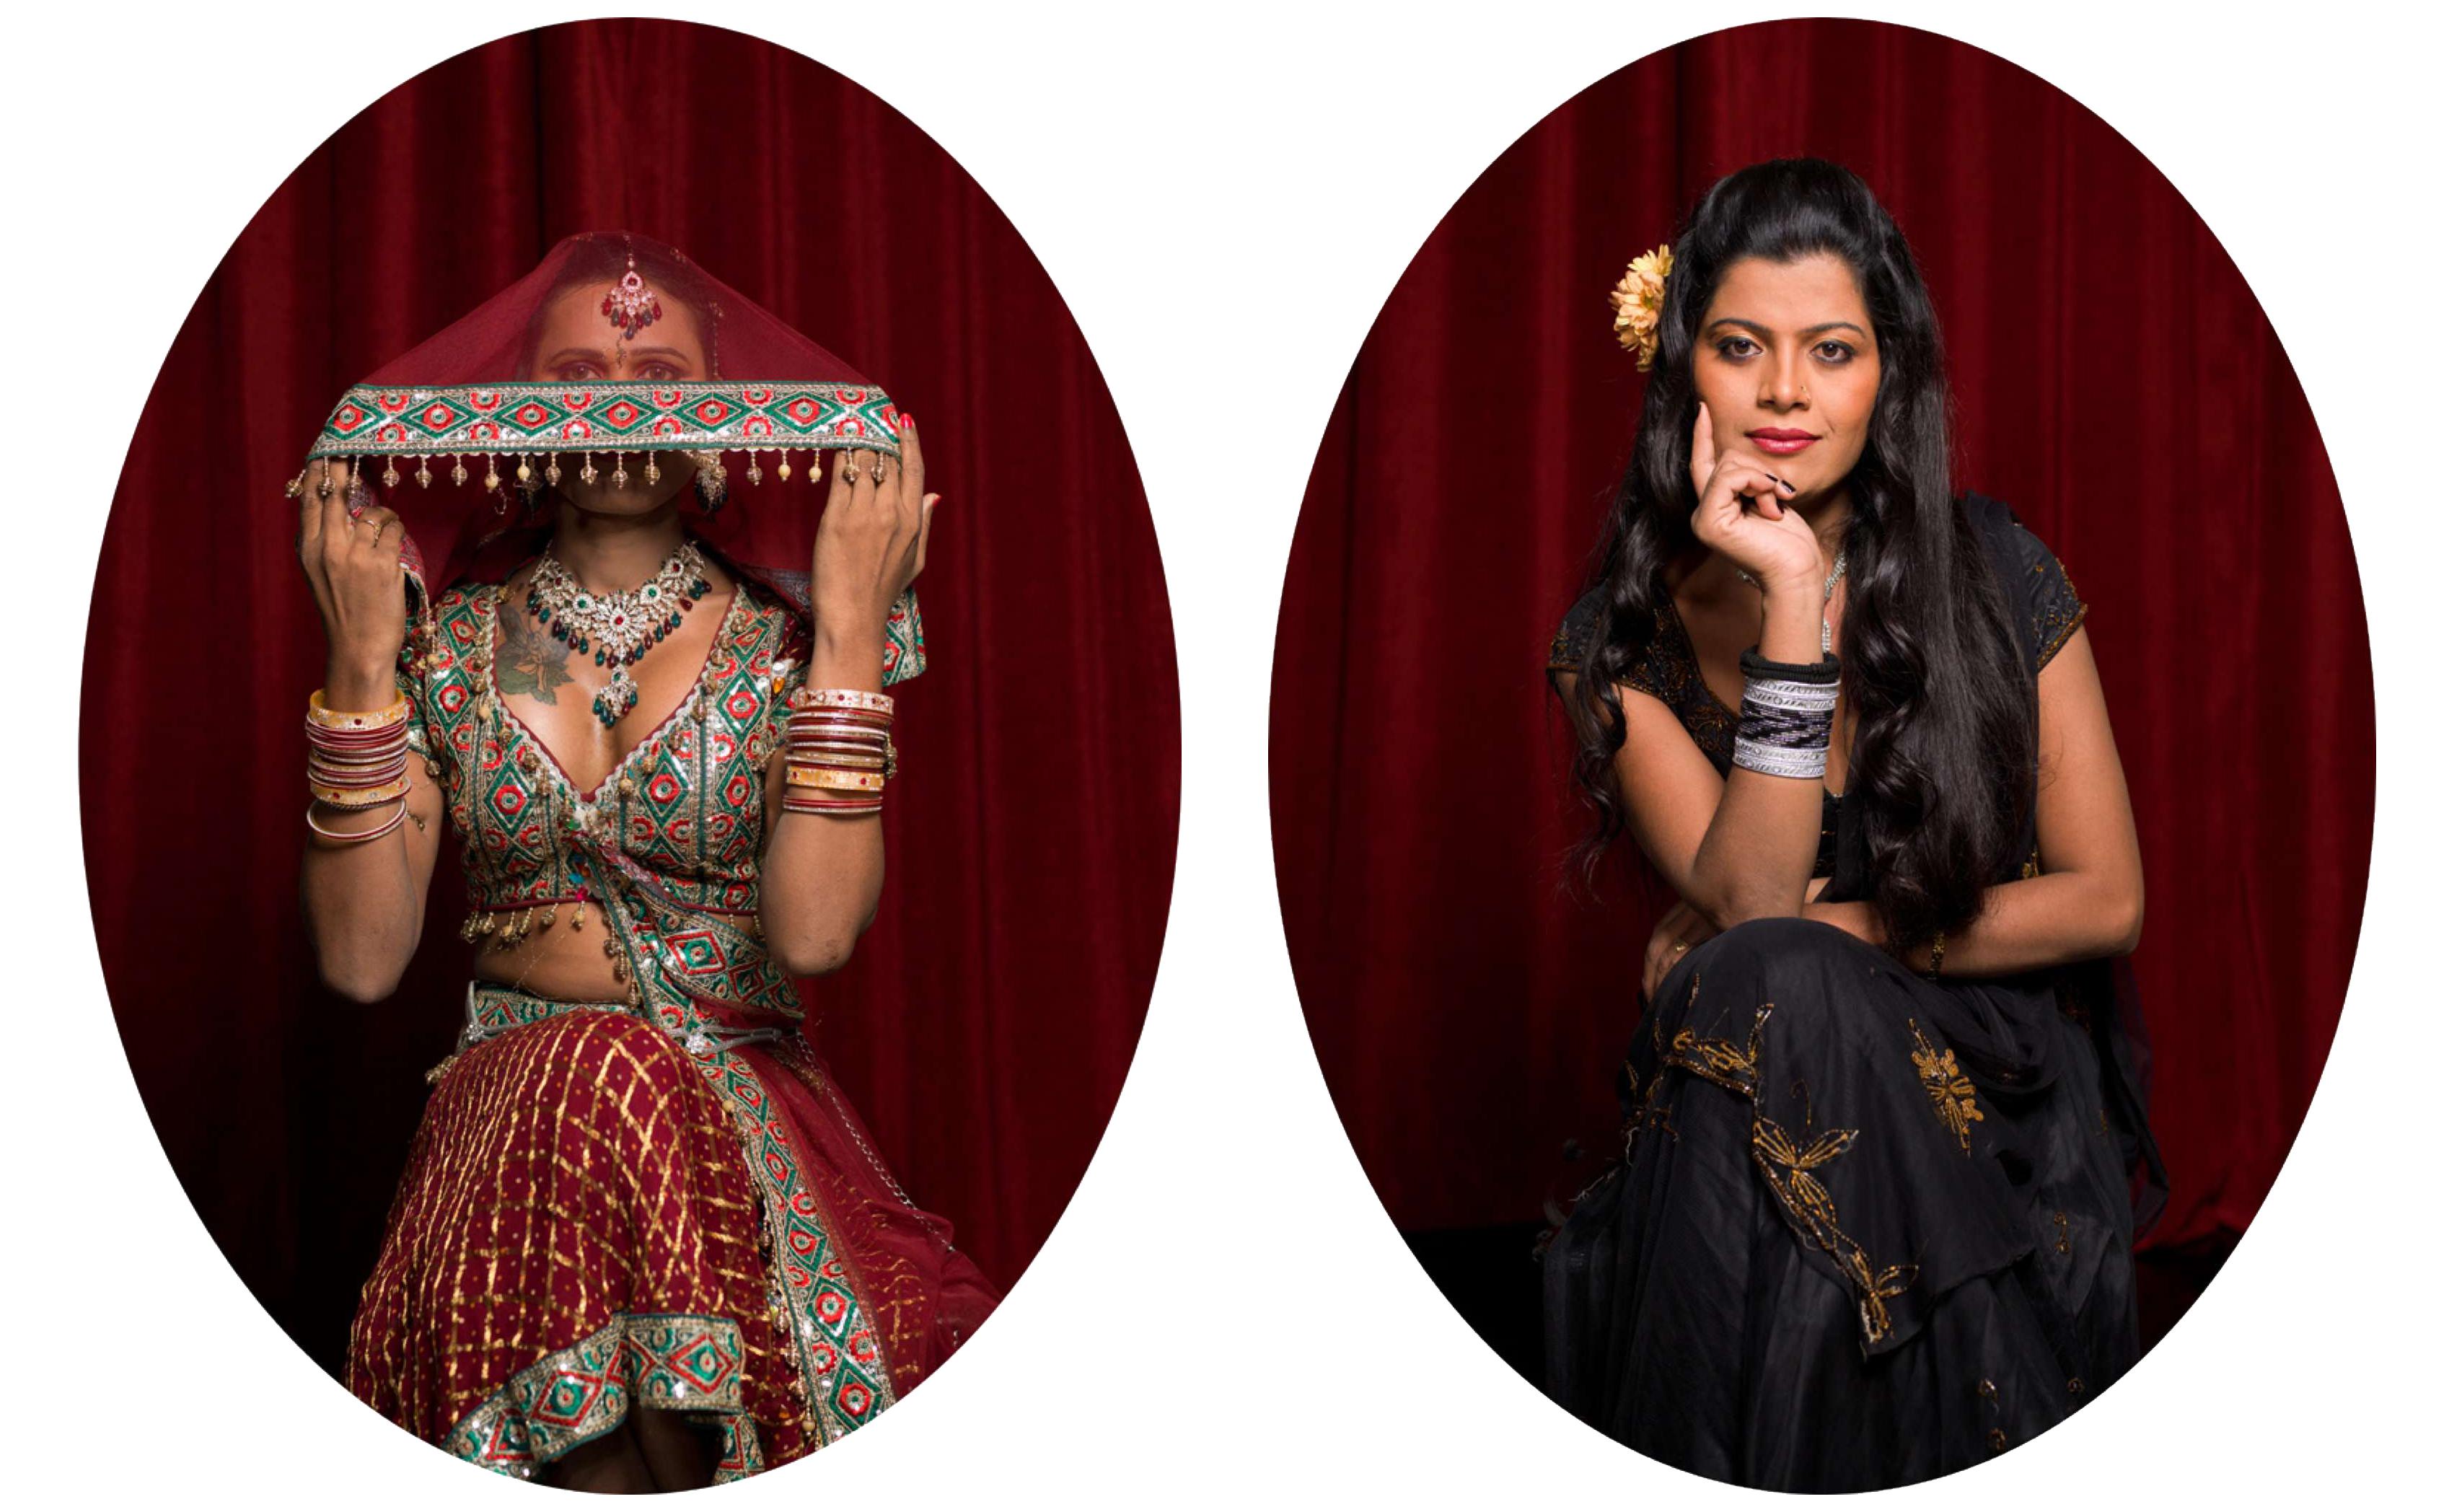 Jill Peters Color Photograph – Harsha und Sneha, Porträts. Aus der Serie The Third Gender of India 